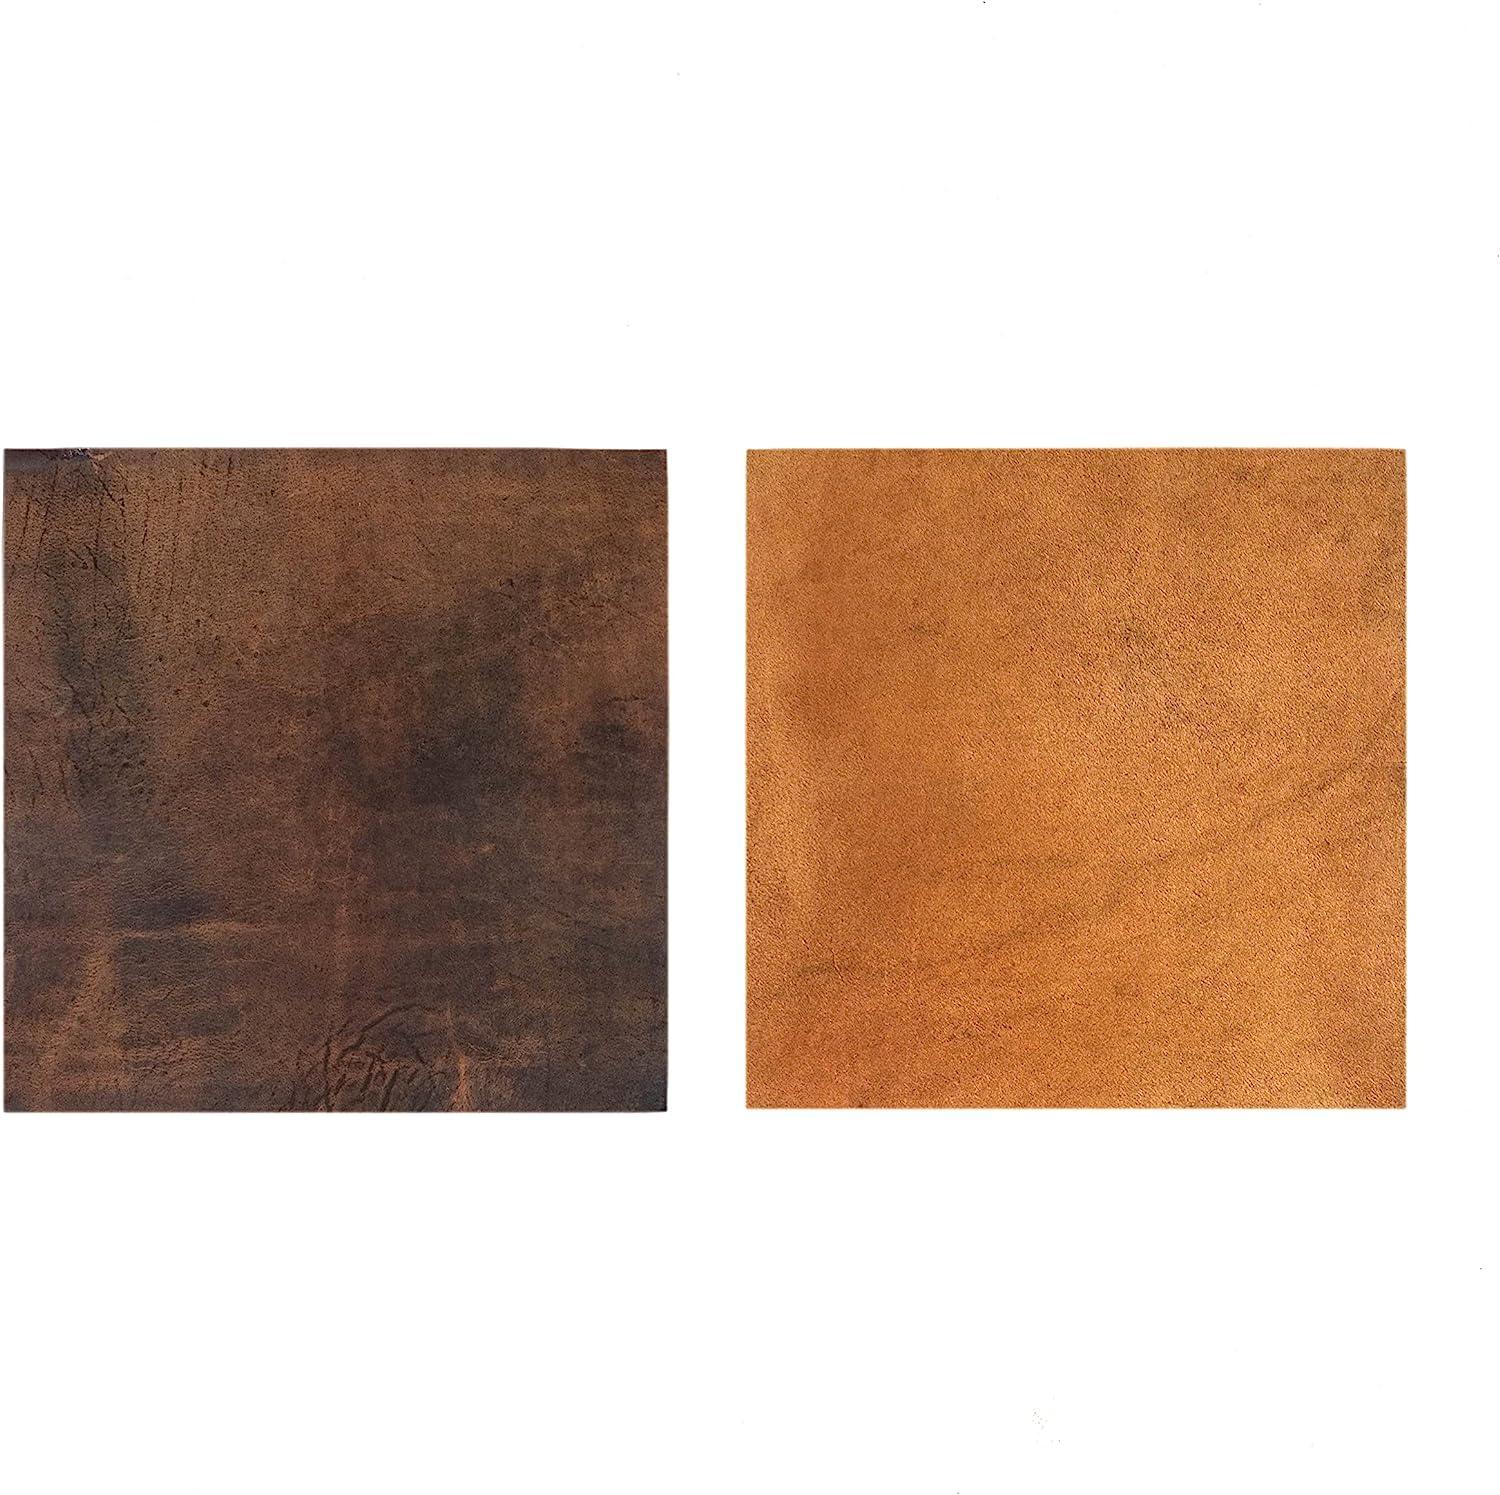 DARK BROWN COLOR Leather Sheets Natural Leather Pieces for